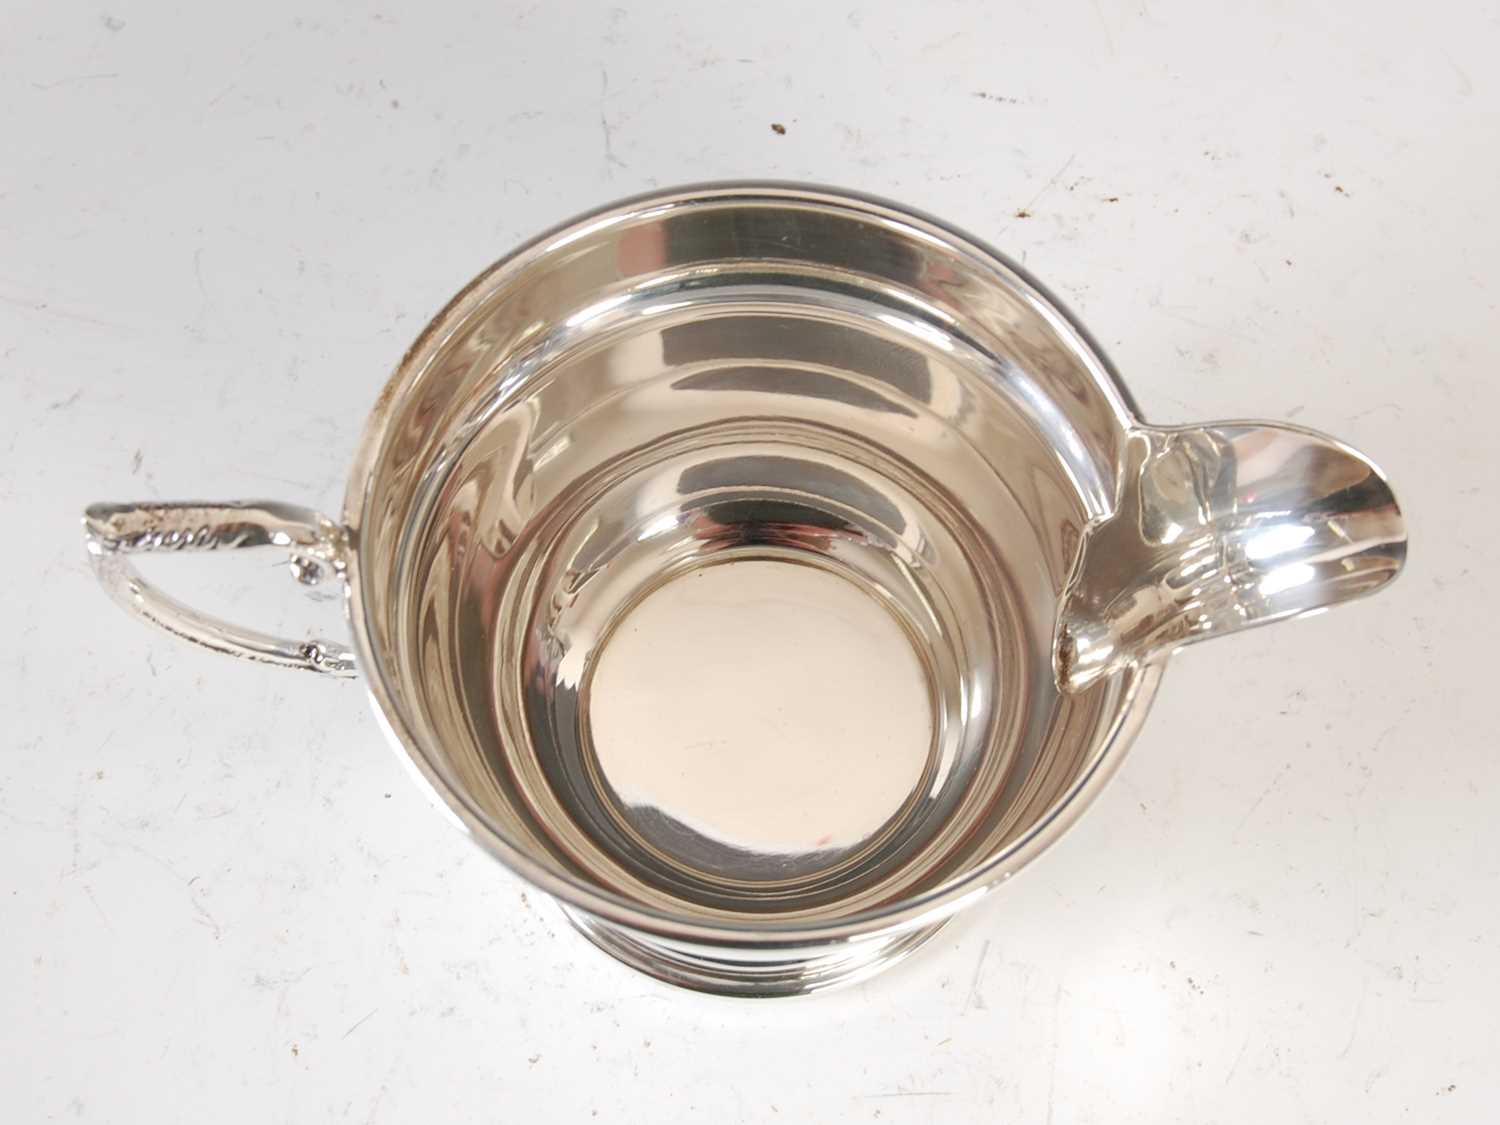 A George V three-piece silver tea set, Birmingham, 1933, makers mark of 'R&D', gross weight 19.6 - Image 13 of 15